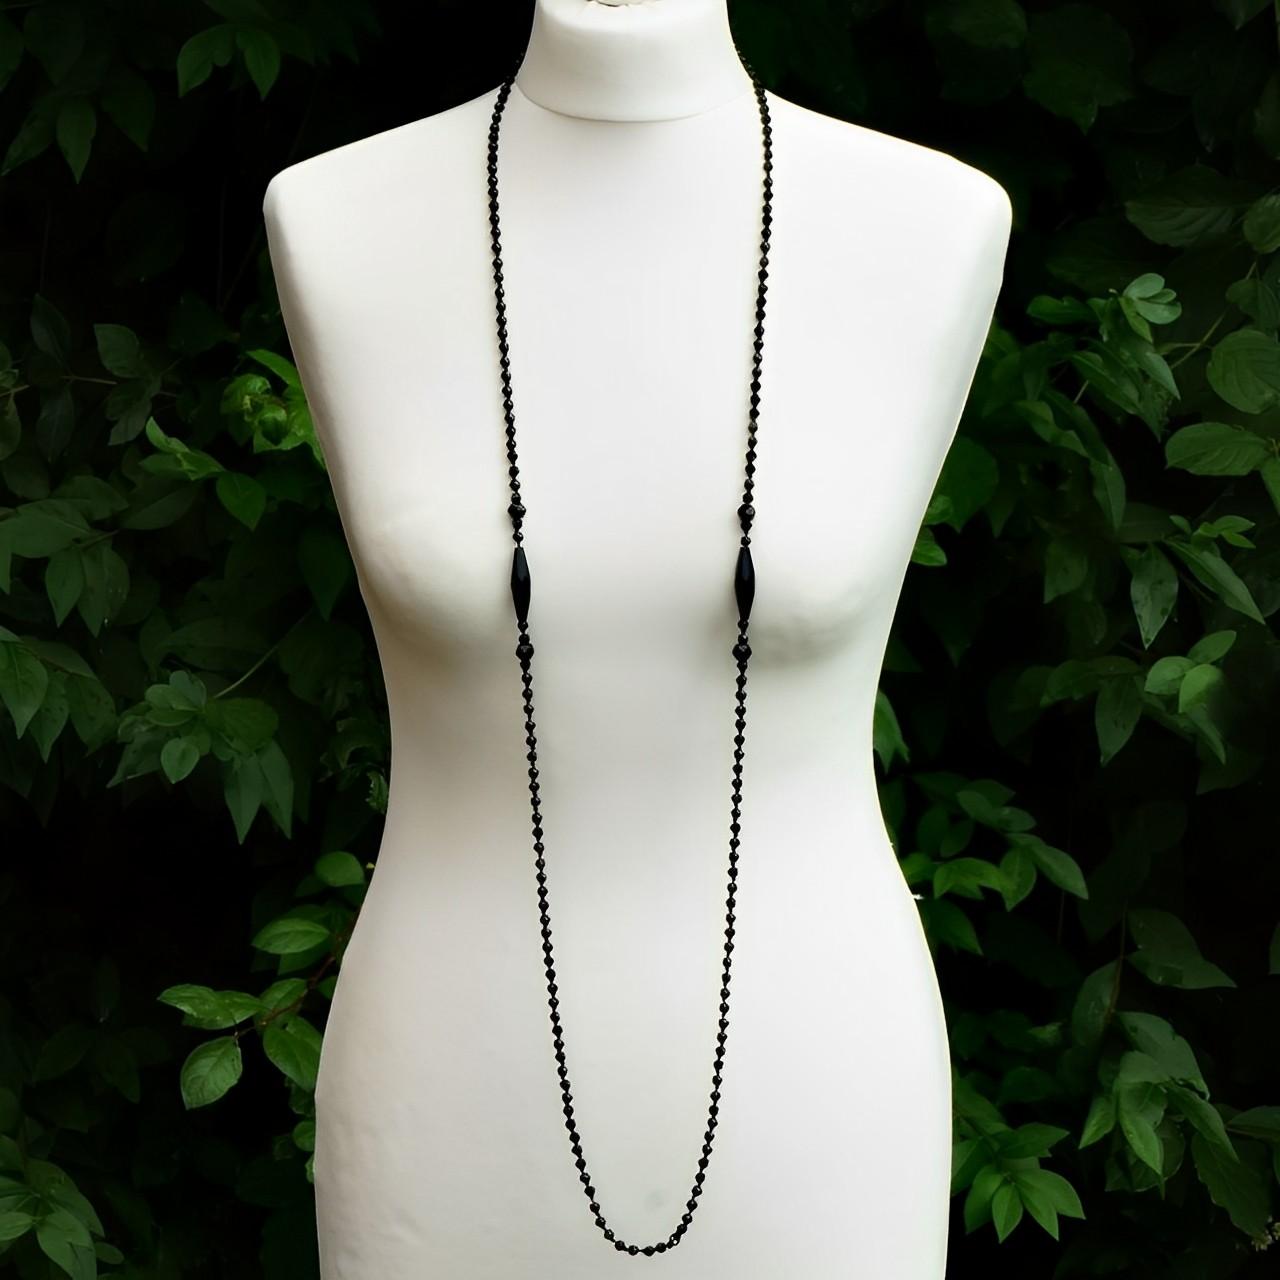 Women's or Men's Art Deco Long Hand Cut French Jet Beads Flapper Necklace circa 1920s